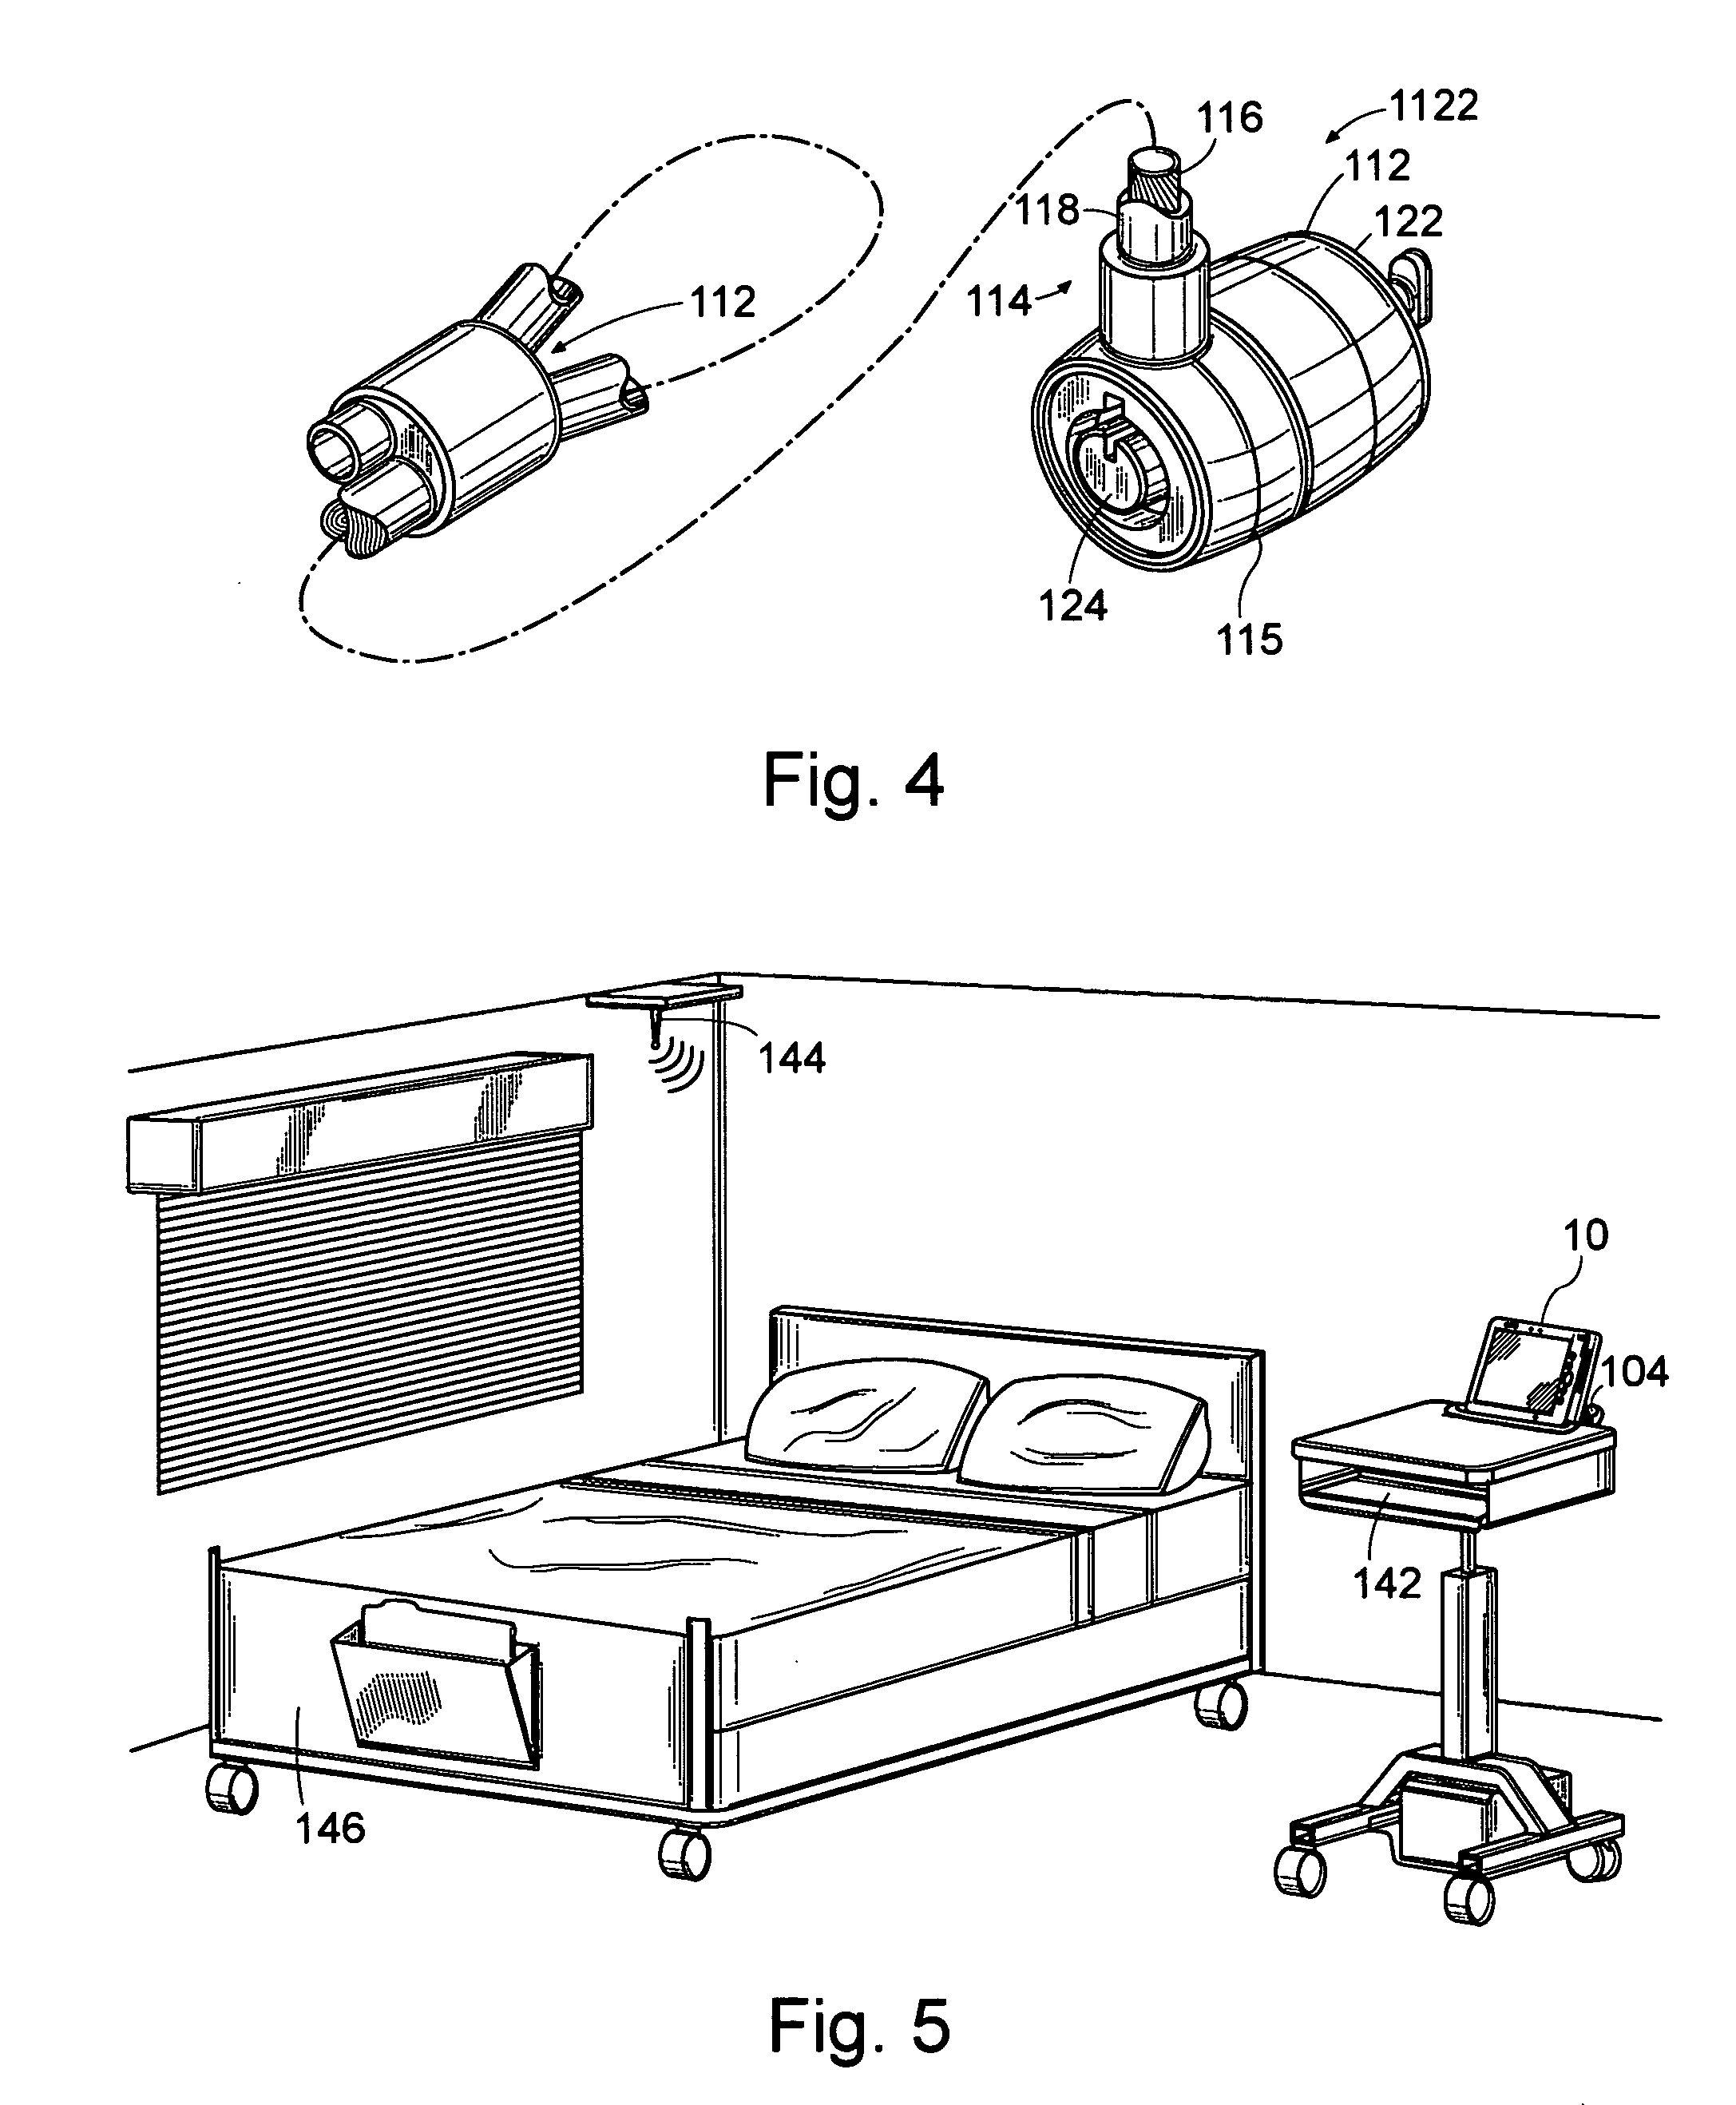 Method and system for controllably and selectively securing a portable computing device to a physical holding device